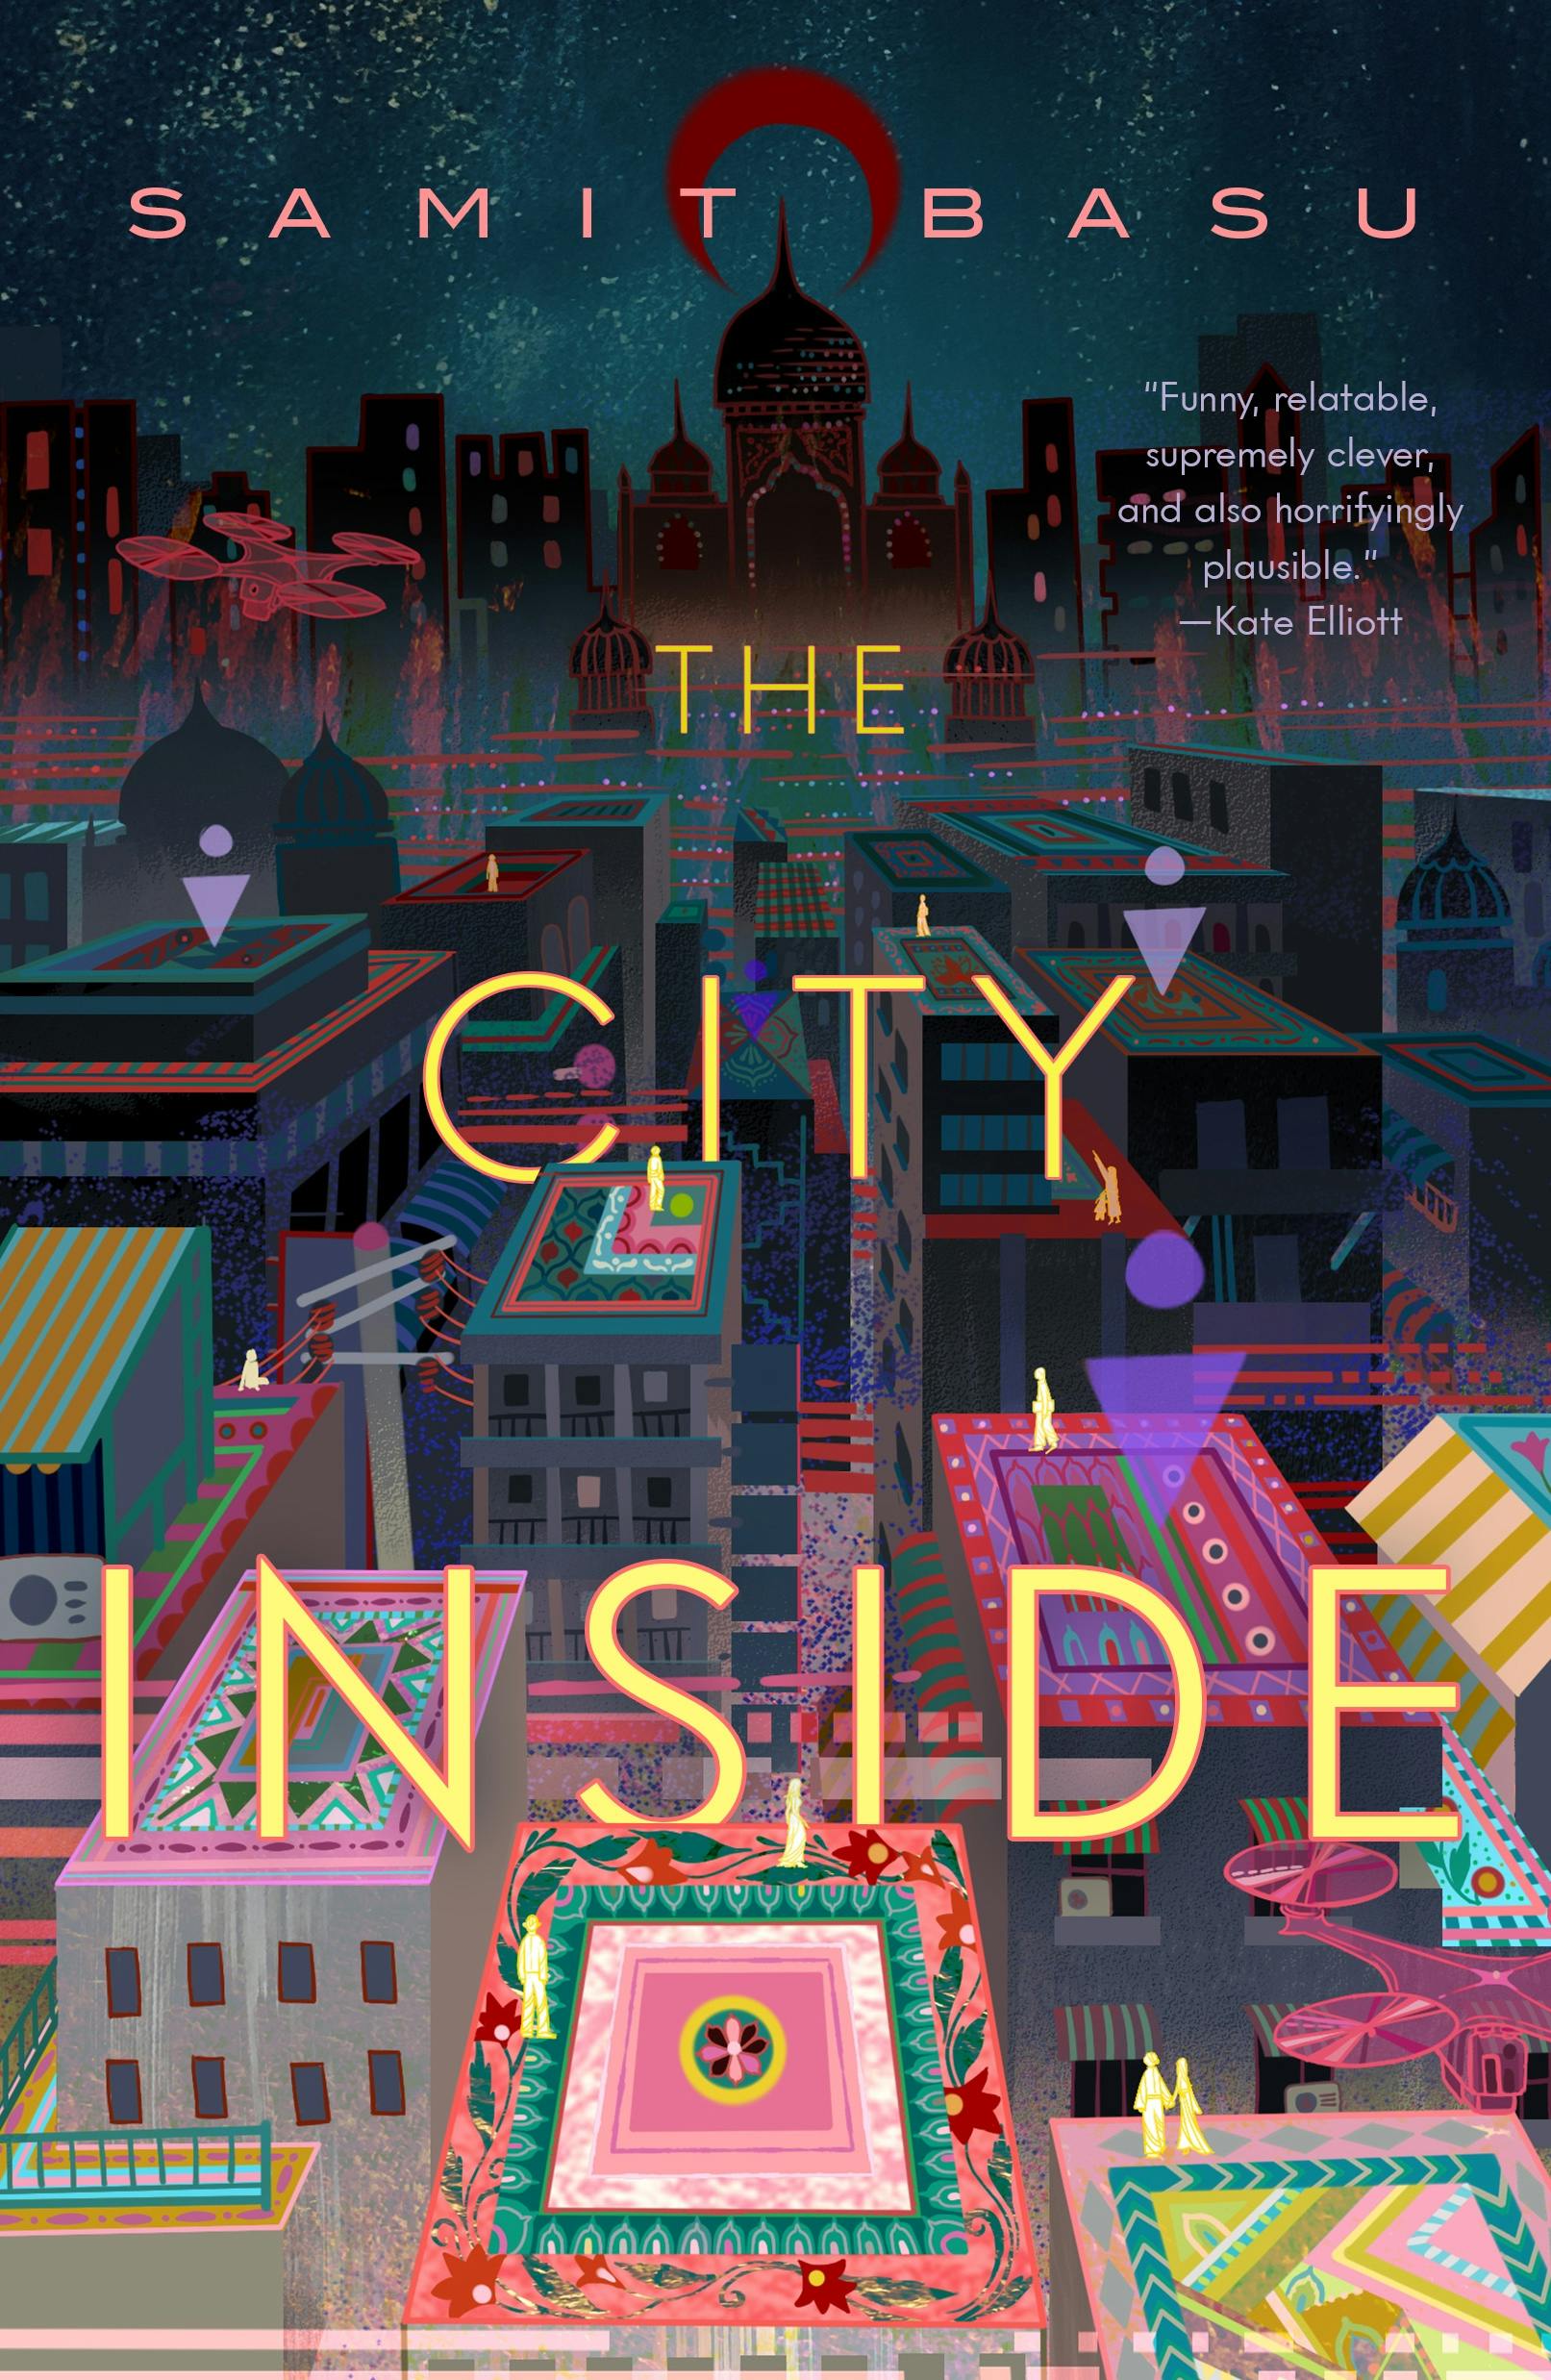 Cover for the book titled as: The City Inside